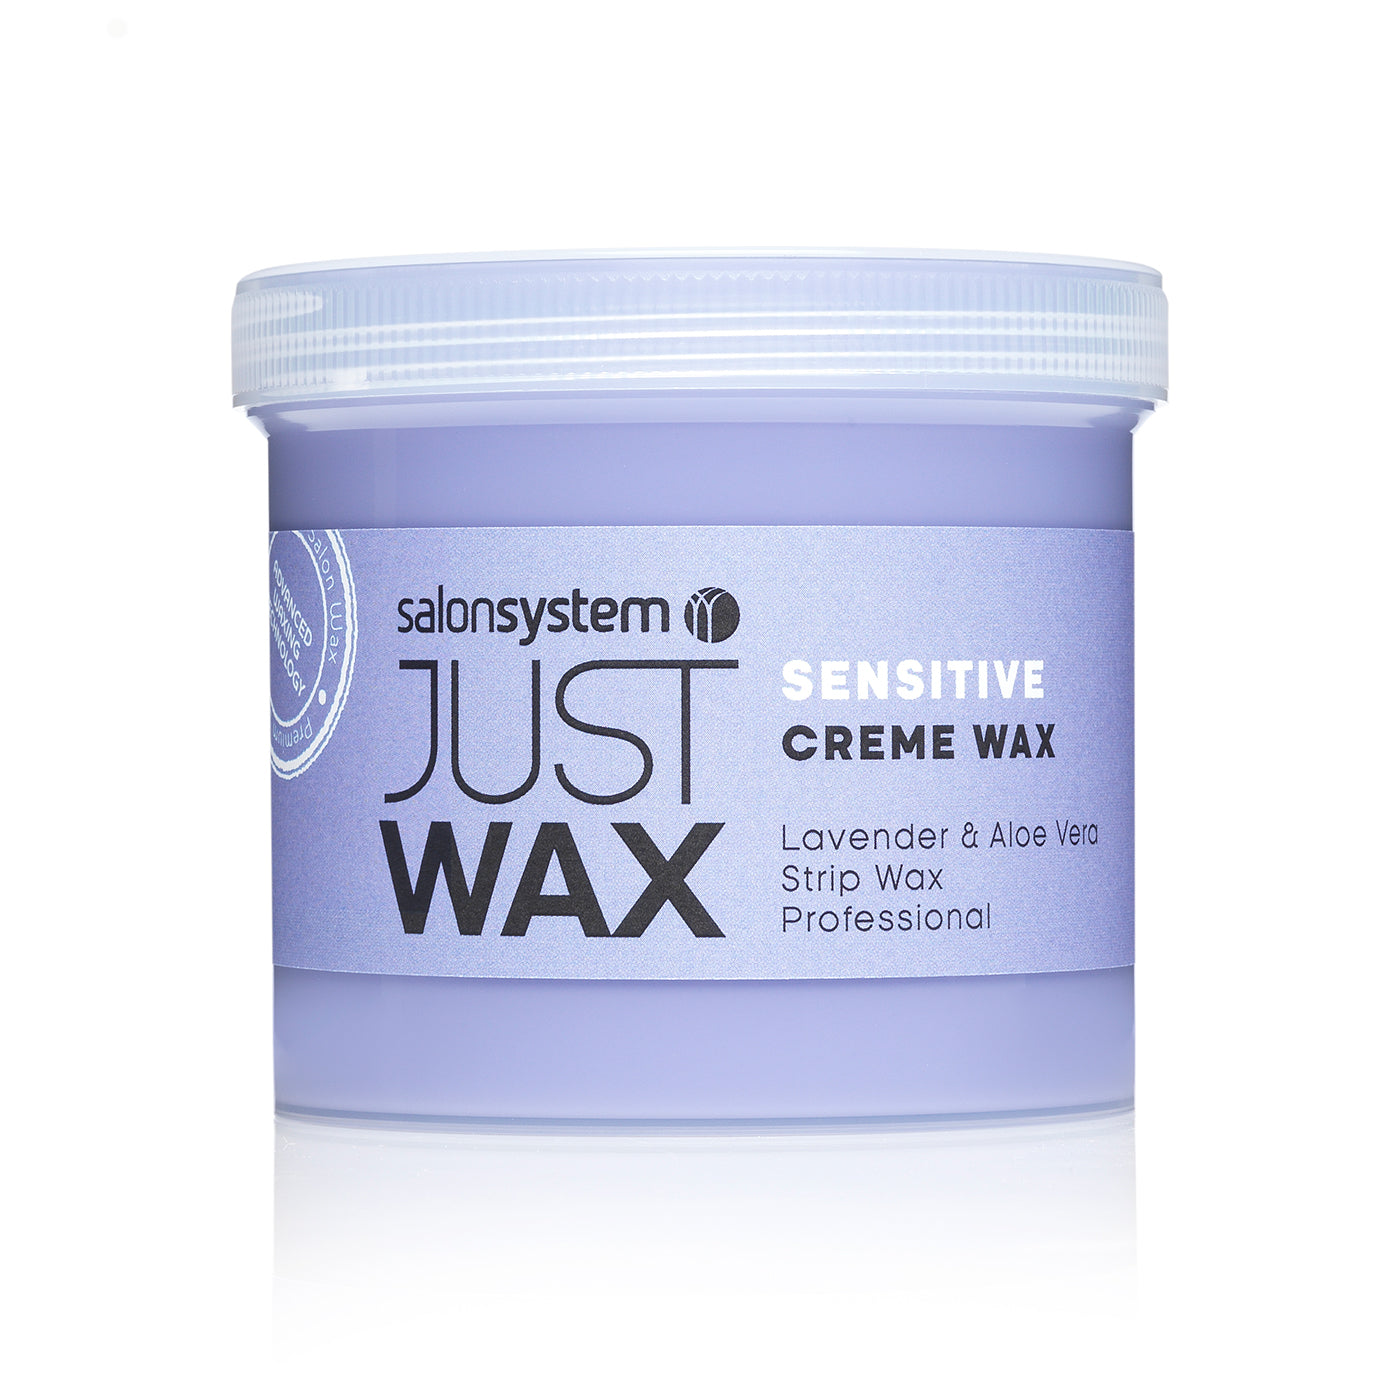 Just Wax Sensitive Creme Wax (450g) - Ultimate Hair and Beauty